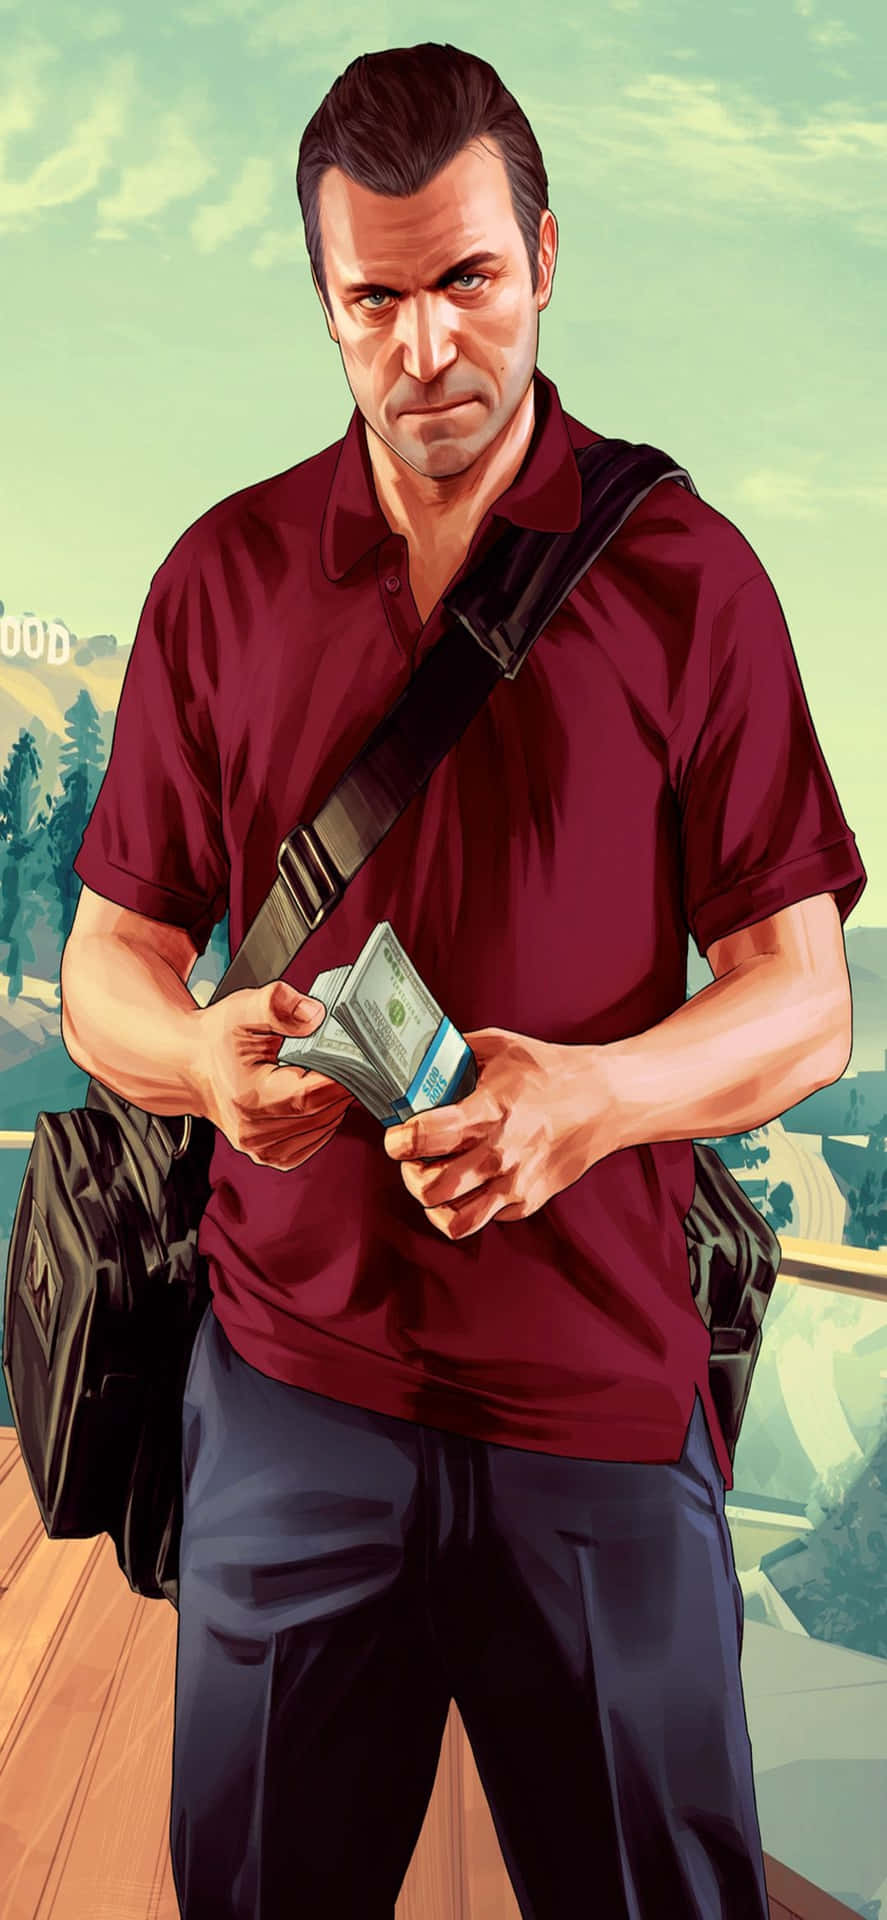 Iphone X Grand Theft Auto V Background&Michael